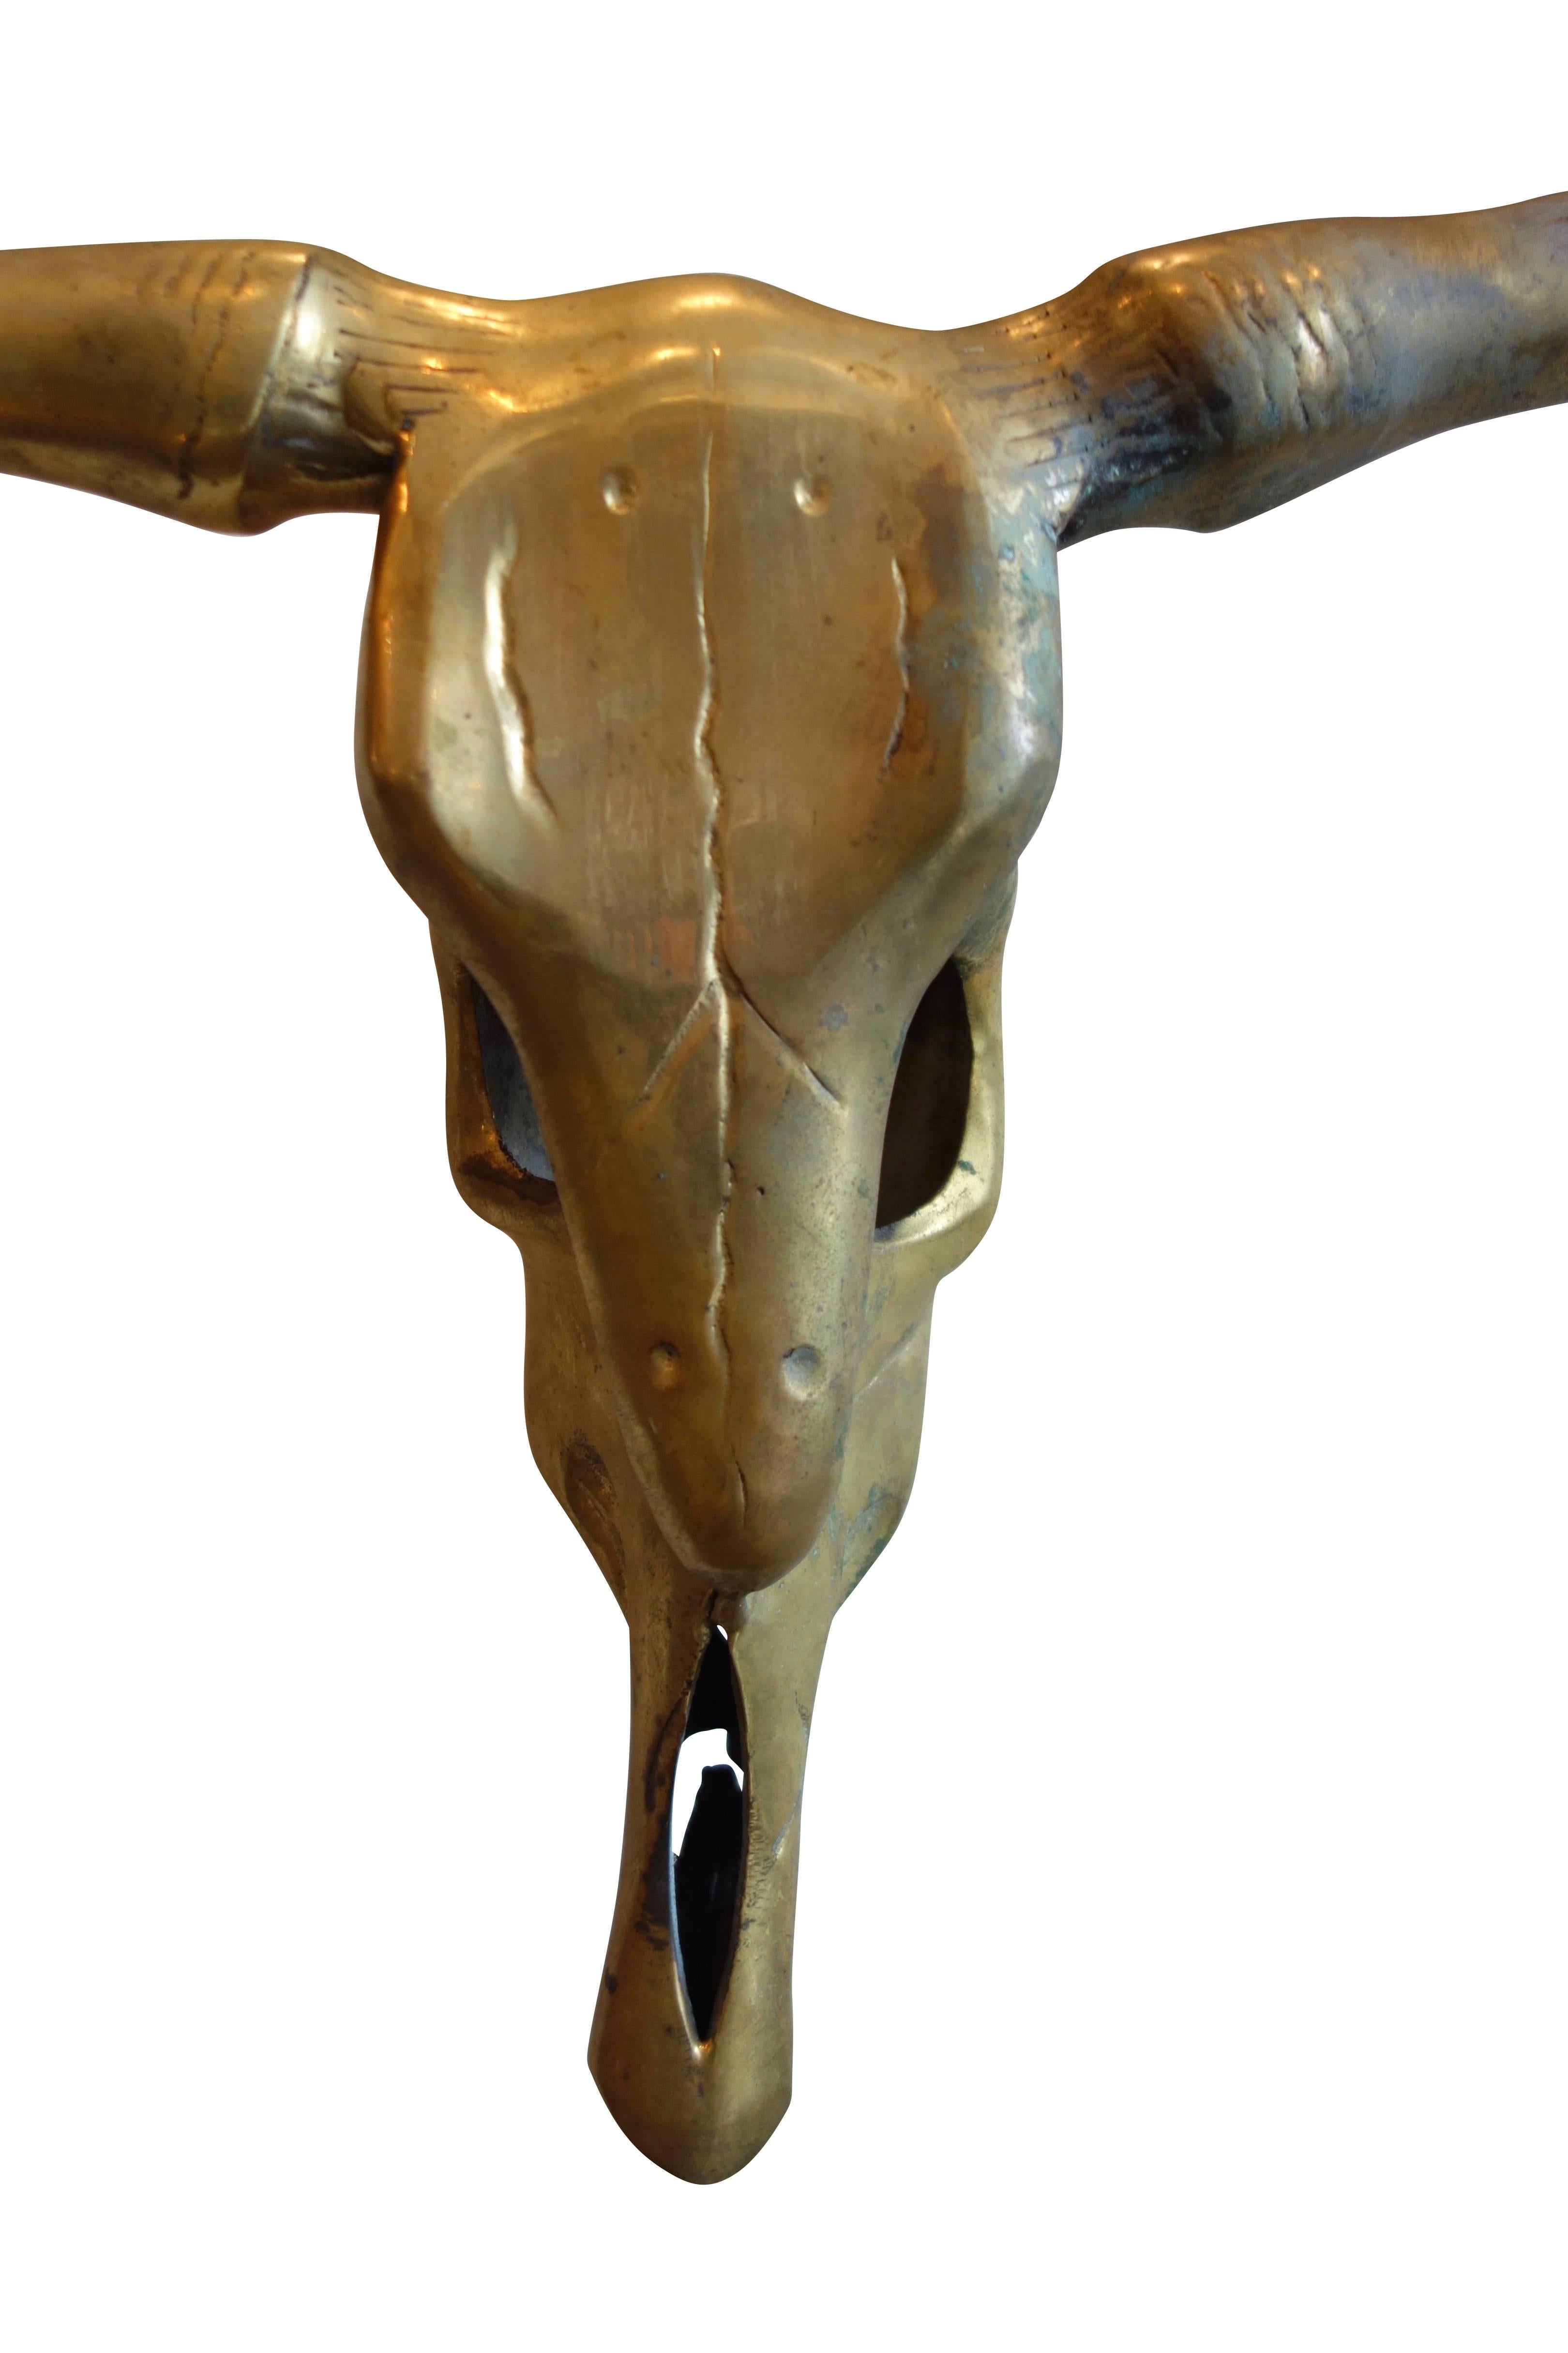 This is a vintage brass wall mount sculpture of a long Horn cow skull.